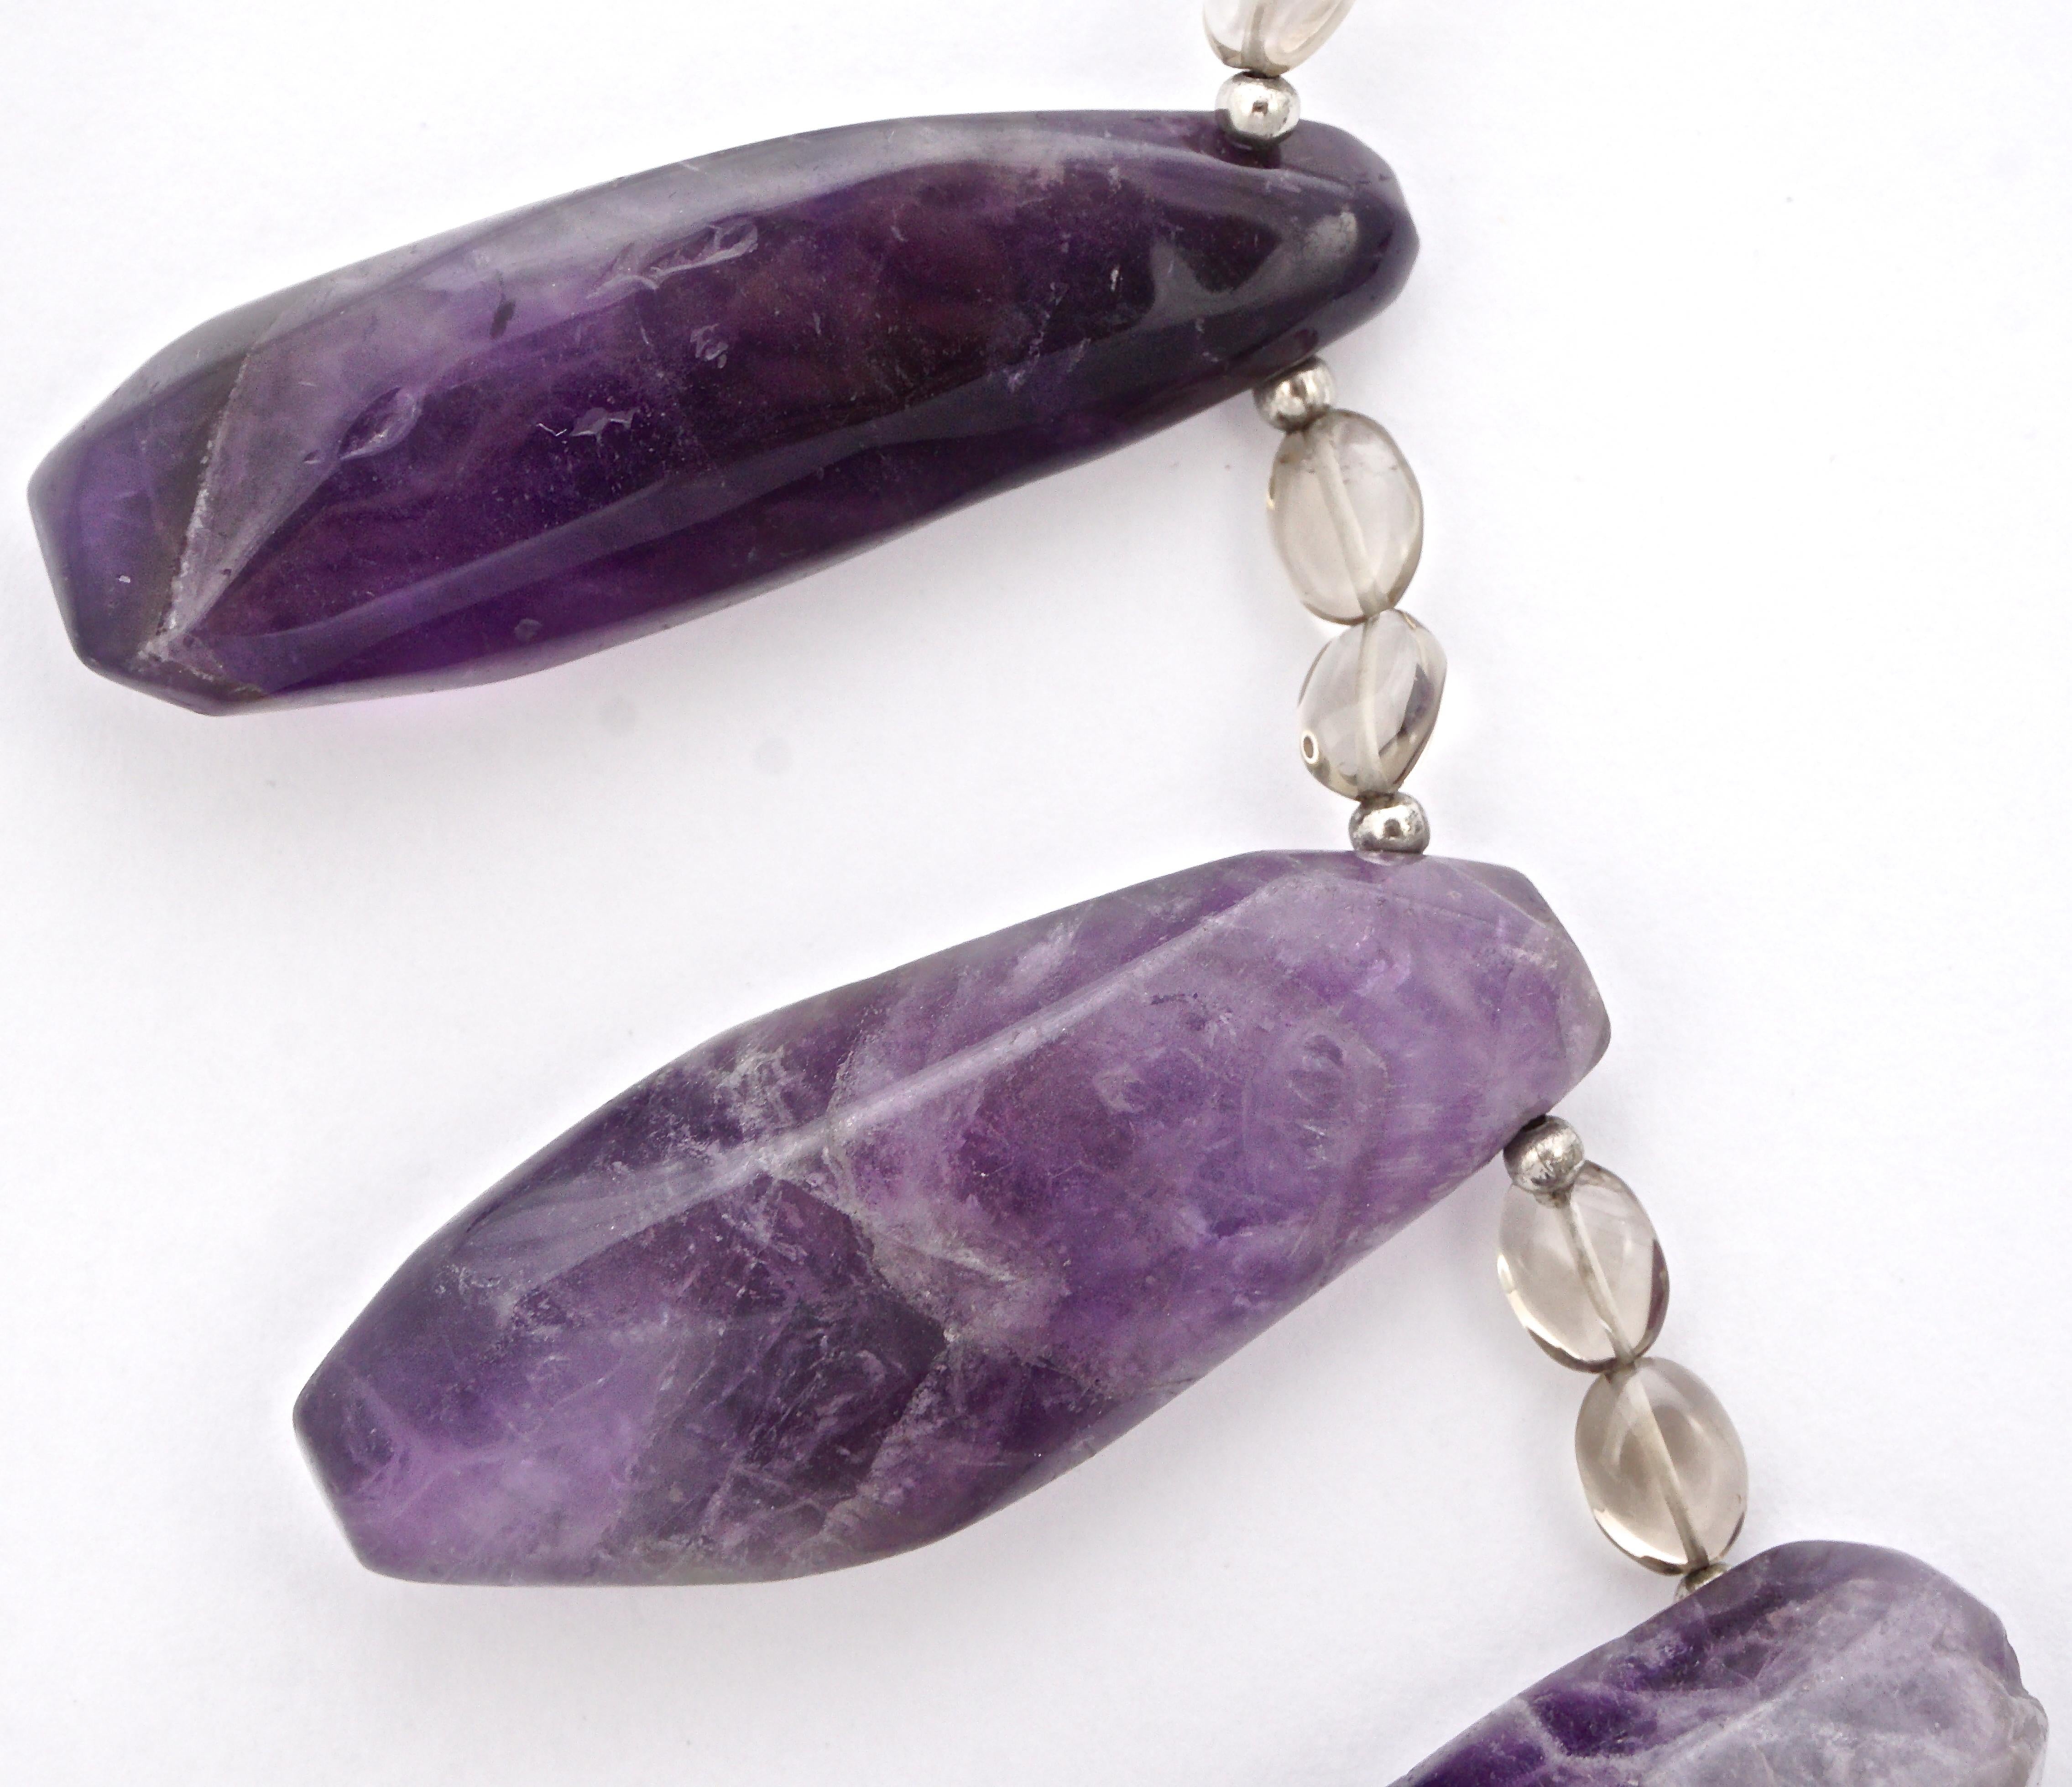 Lovely clear glass necklace interspersed with silver tone balls, featuring seven chunky pieces of natural amethyst. The hook clasp is not stamped but tests as silver. The necklace measures length 40.7cm / 16.02 inches, and the middle amethyst is